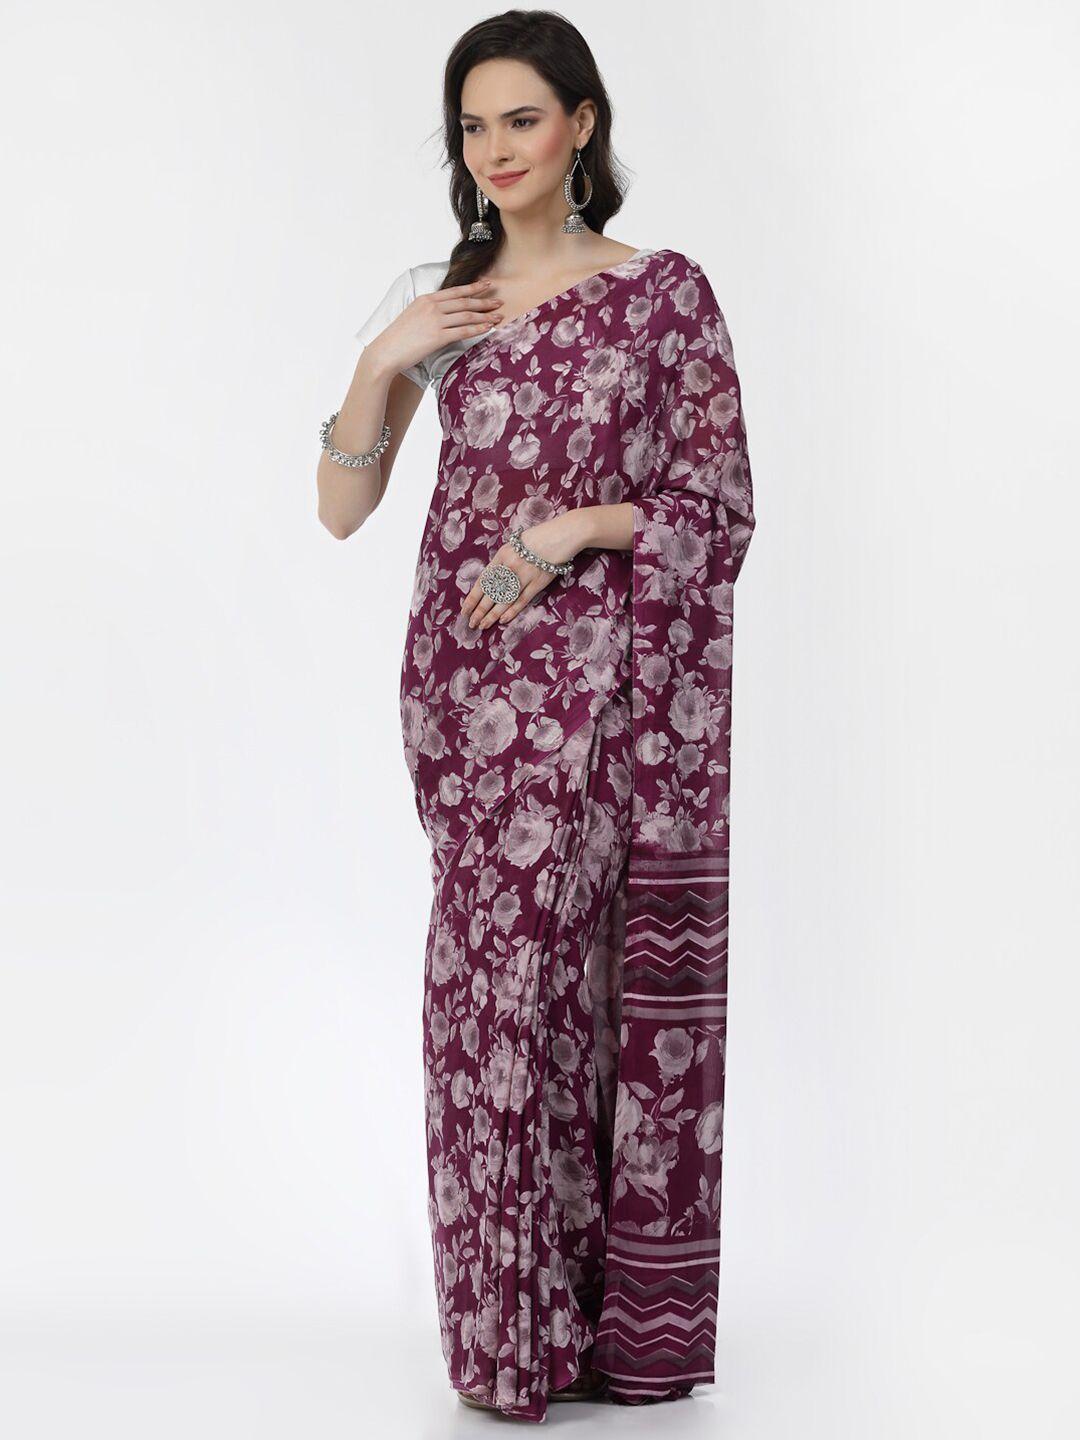 kalini maroon & white floral poly georgette saree